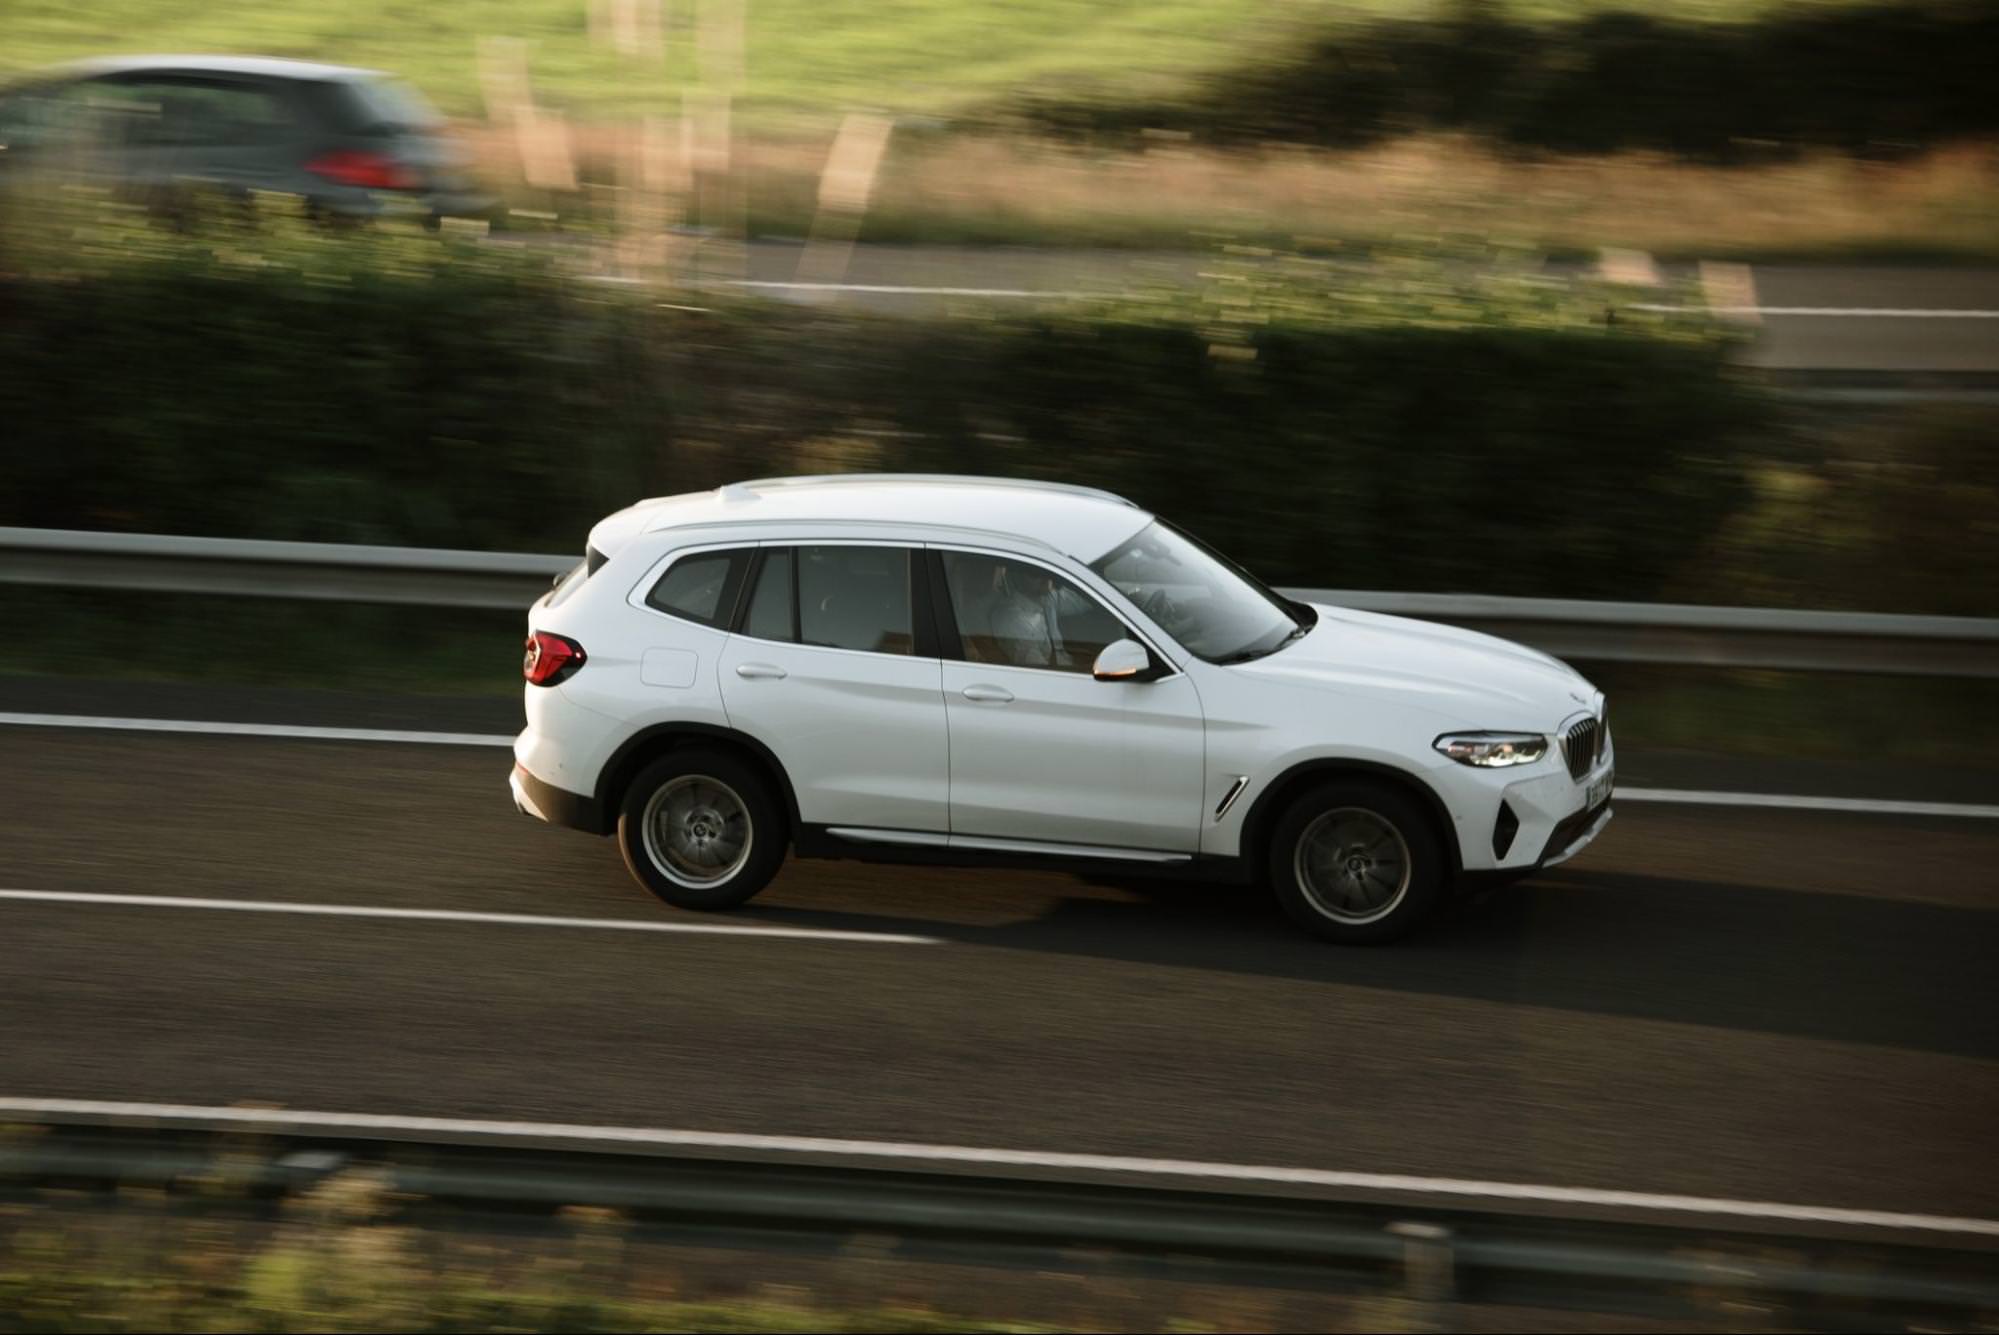 A white BMW X3 SUV driving on a highway, captured in motion with blurred background.